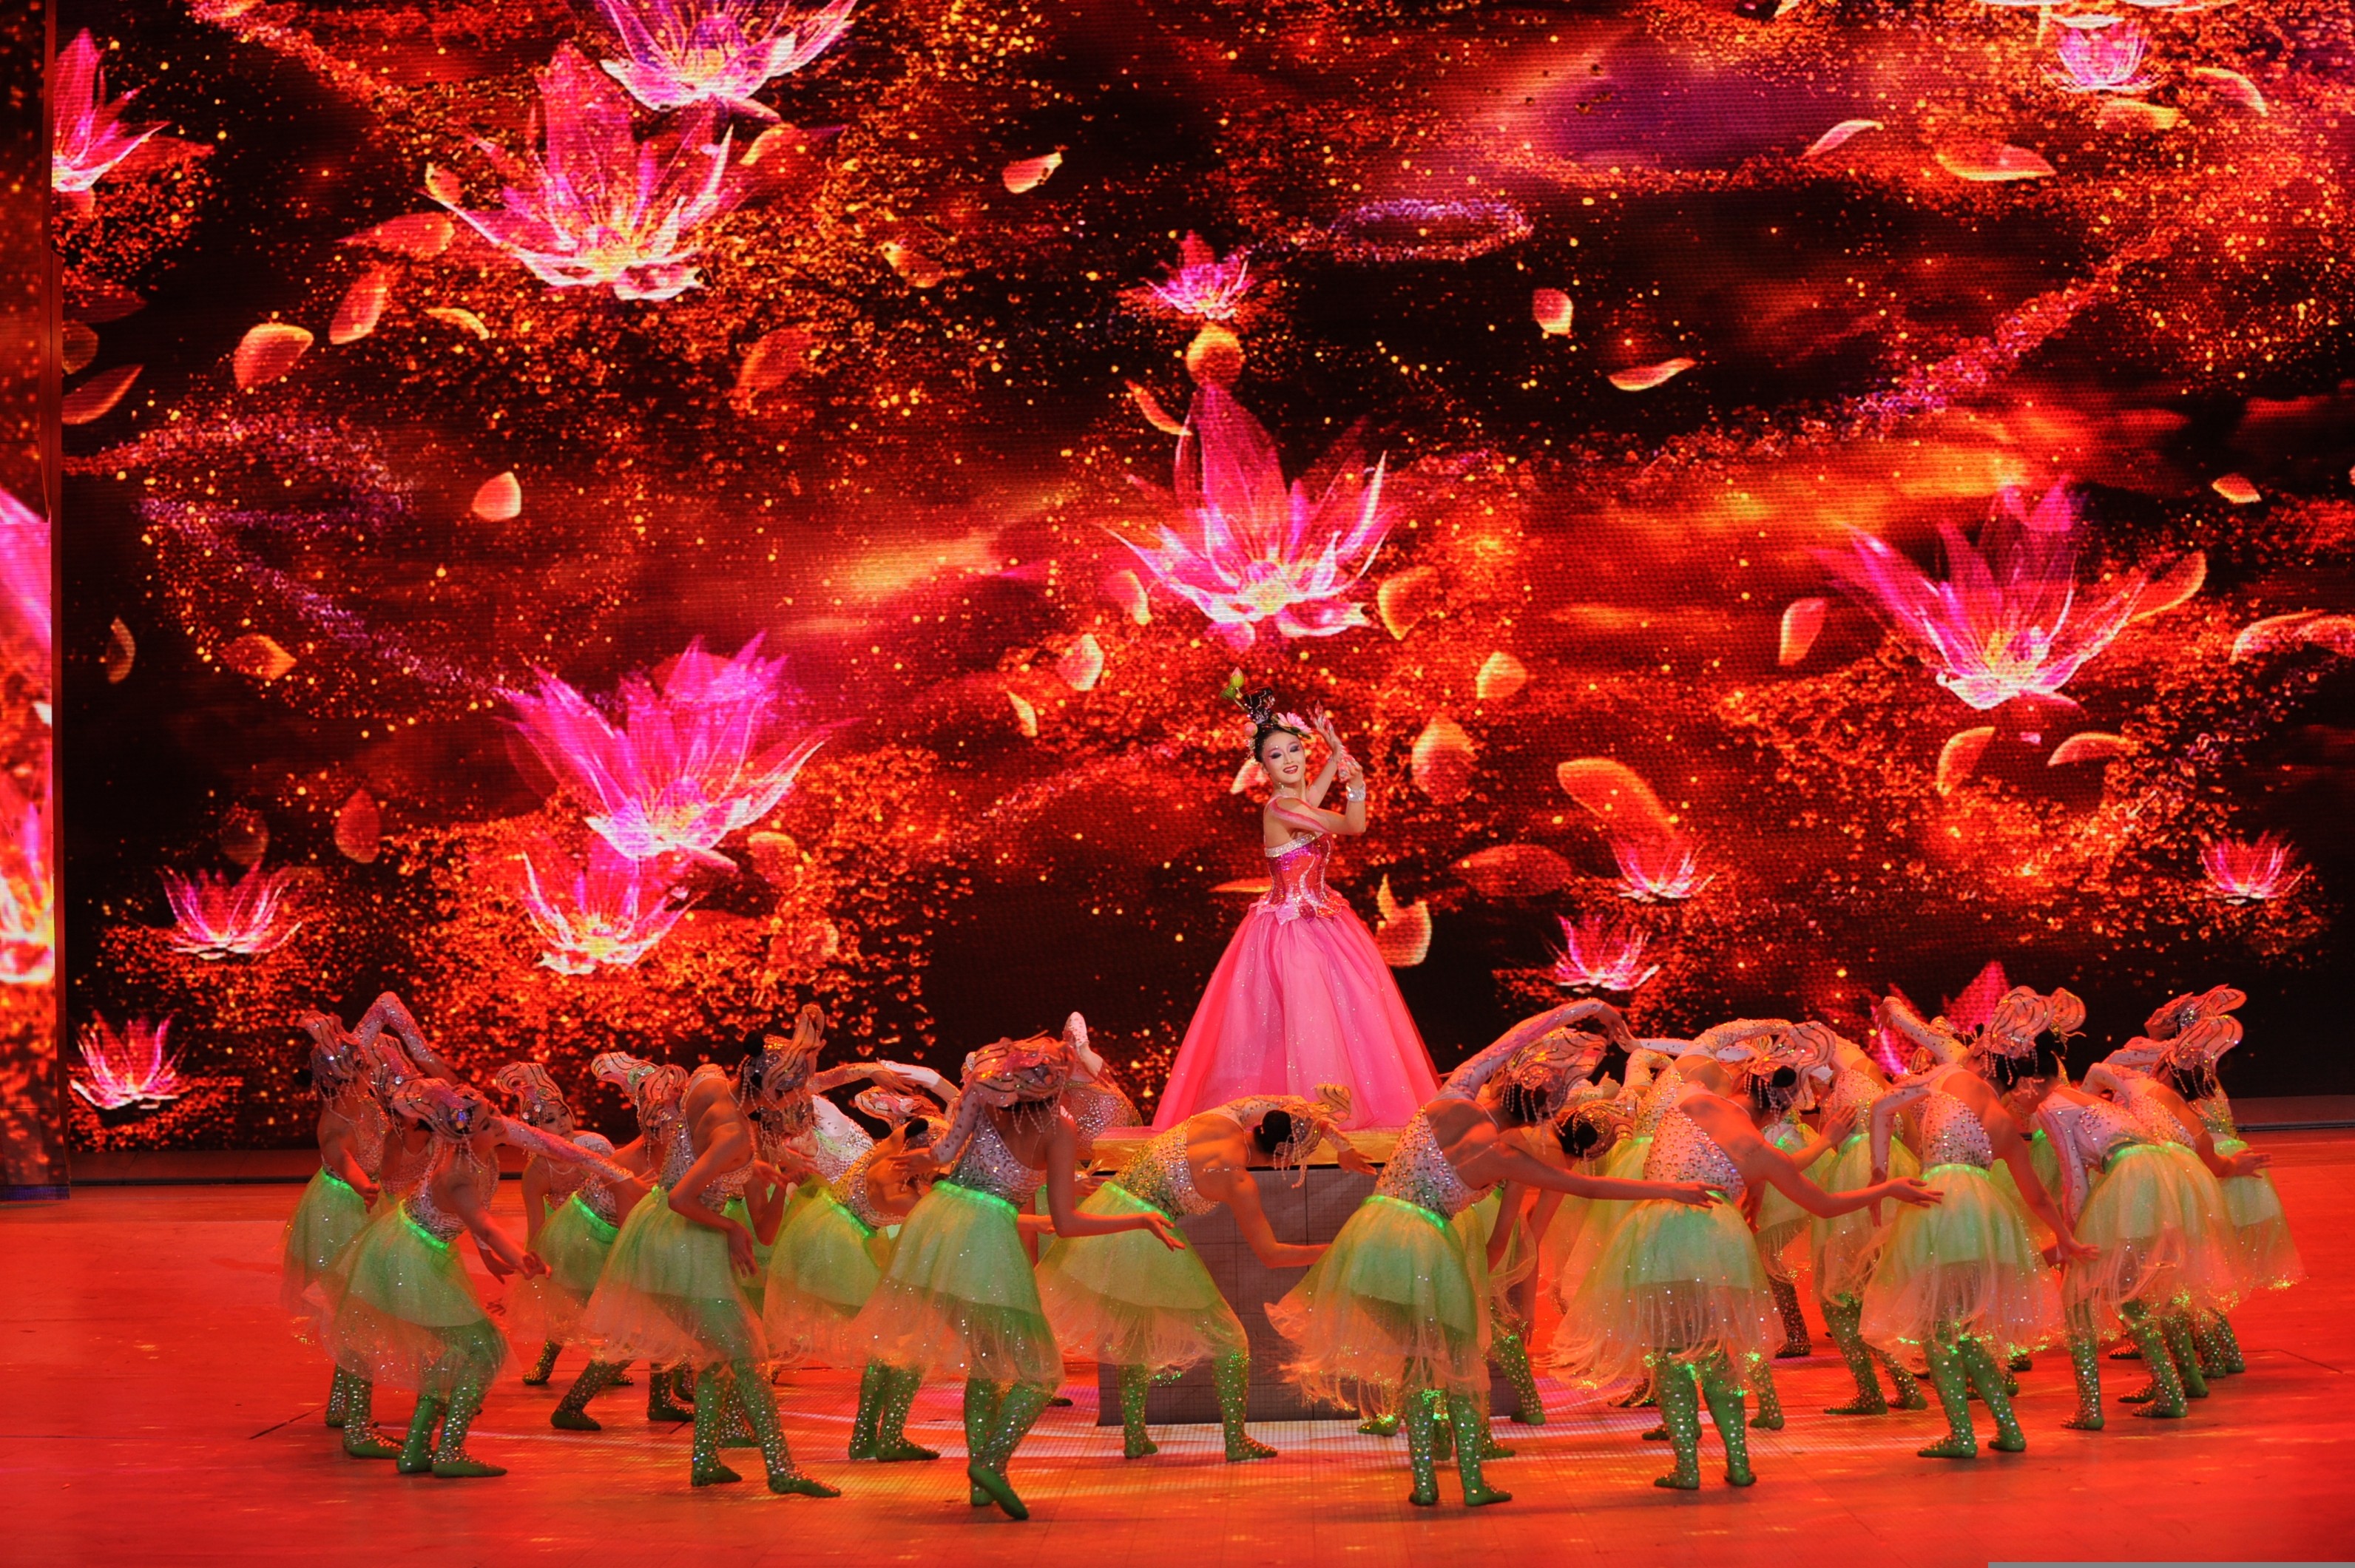 A scene from the 2010 edition of CCTV’s annual Lunar New Year programme. Photo: China Foto Press